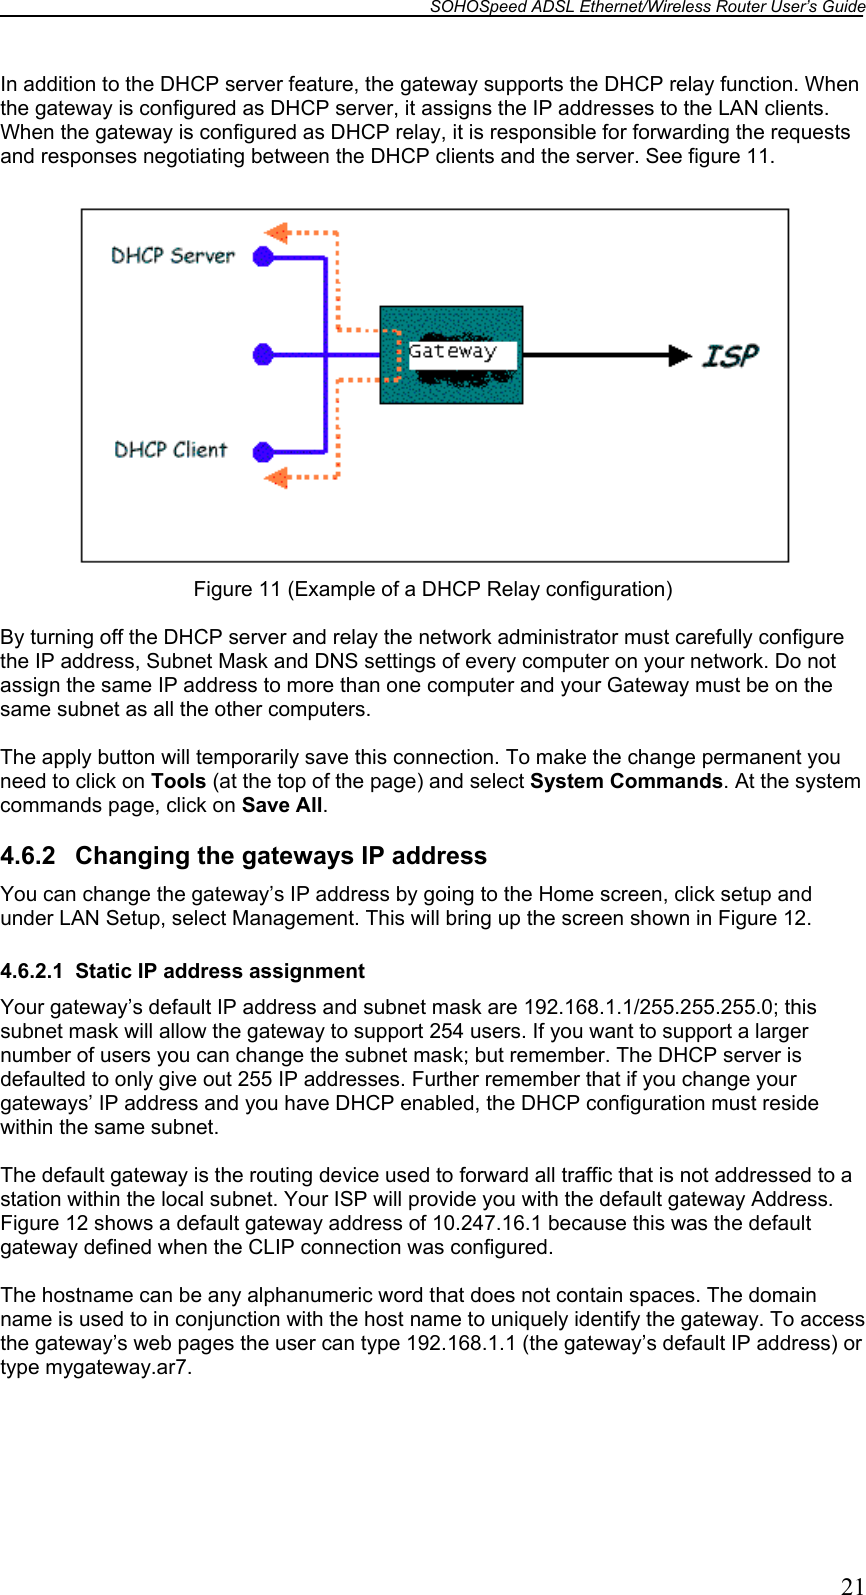 SOHOSpeed ADSL Ethernet/Wireless Router User’s Guide   21 In addition to the DHCP server feature, the gateway supports the DHCP relay function. When the gateway is configured as DHCP server, it assigns the IP addresses to the LAN clients. When the gateway is configured as DHCP relay, it is responsible for forwarding the requests and responses negotiating between the DHCP clients and the server. See figure 11.   Figure 11 (Example of a DHCP Relay configuration)  By turning off the DHCP server and relay the network administrator must carefully configure the IP address, Subnet Mask and DNS settings of every computer on your network. Do not assign the same IP address to more than one computer and your Gateway must be on the same subnet as all the other computers.  The apply button will temporarily save this connection. To make the change permanent you need to click on Tools (at the top of the page) and select System Commands. At the system commands page, click on Save All.  4.6.2  Changing the gateways IP address You can change the gateway’s IP address by going to the Home screen, click setup and under LAN Setup, select Management. This will bring up the screen shown in Figure 12.  4.6.2.1  Static IP address assignment Your gateway’s default IP address and subnet mask are 192.168.1.1/255.255.255.0; this subnet mask will allow the gateway to support 254 users. If you want to support a larger number of users you can change the subnet mask; but remember. The DHCP server is defaulted to only give out 255 IP addresses. Further remember that if you change your gateways’ IP address and you have DHCP enabled, the DHCP configuration must reside within the same subnet.  The default gateway is the routing device used to forward all traffic that is not addressed to a station within the local subnet. Your ISP will provide you with the default gateway Address. Figure 12 shows a default gateway address of 10.247.16.1 because this was the default gateway defined when the CLIP connection was configured.  The hostname can be any alphanumeric word that does not contain spaces. The domain name is used to in conjunction with the host name to uniquely identify the gateway. To access the gateway’s web pages the user can type 192.168.1.1 (the gateway’s default IP address) or type mygateway.ar7.  